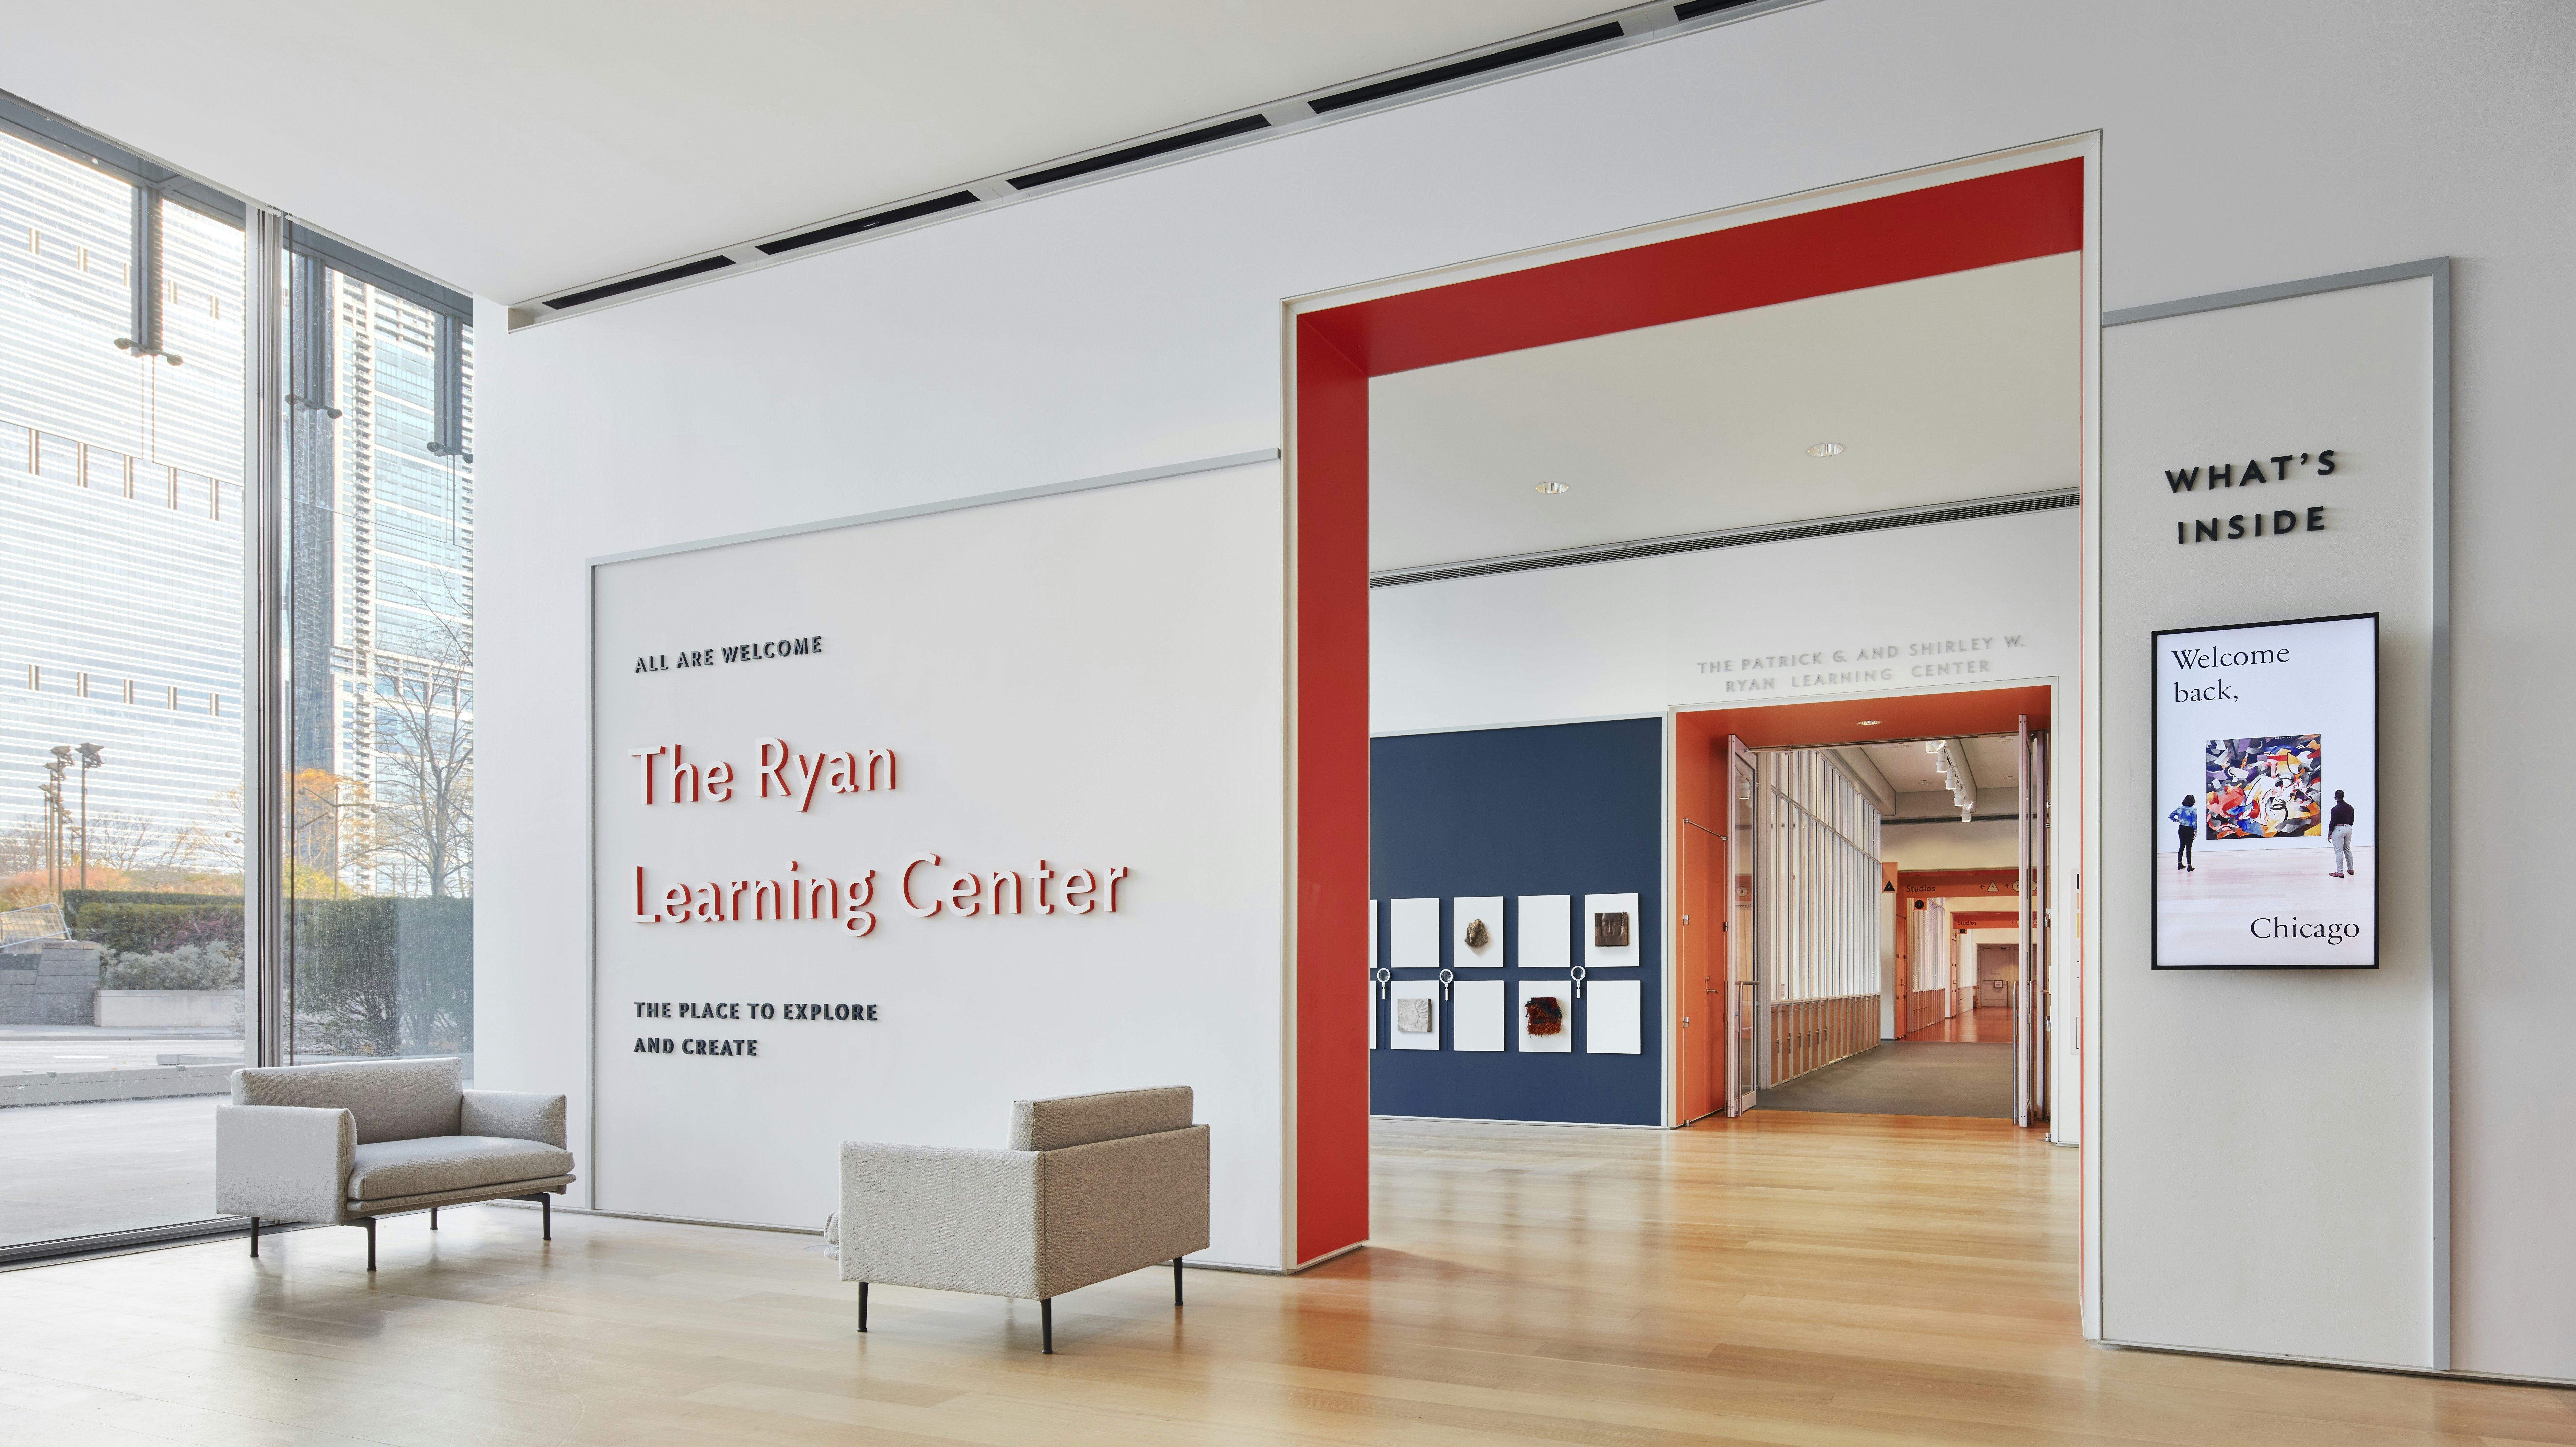 A light filled hall showing the entrance to the Ryan Learning Center